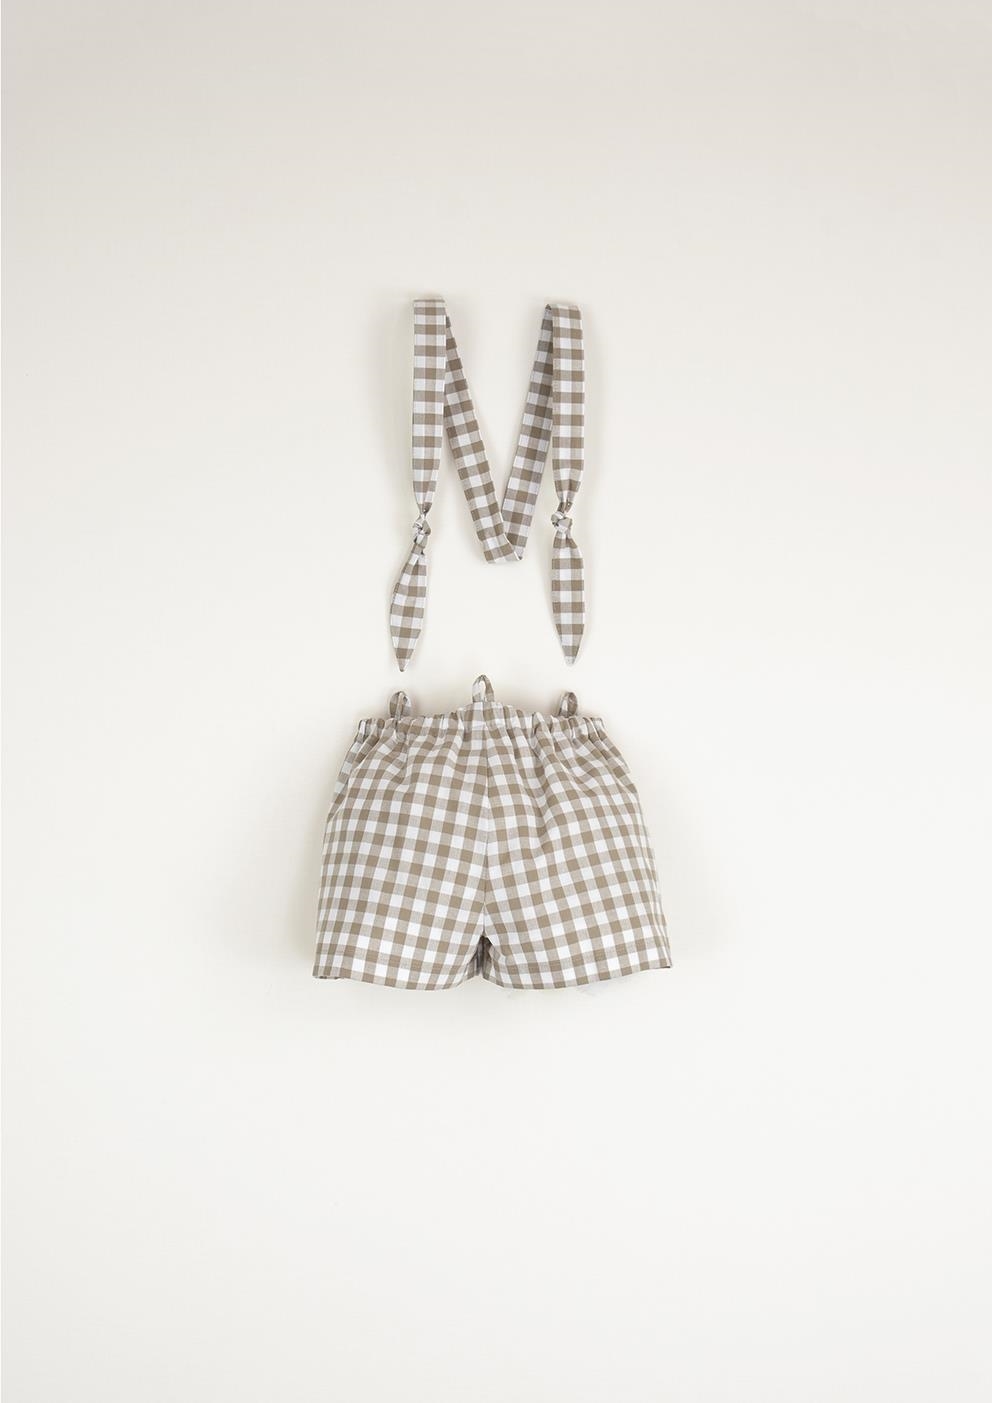 Mod.15.5 Gingham dungarees with removable straps | SS23 Mod.15.5 Gingham dungarees with removable straps